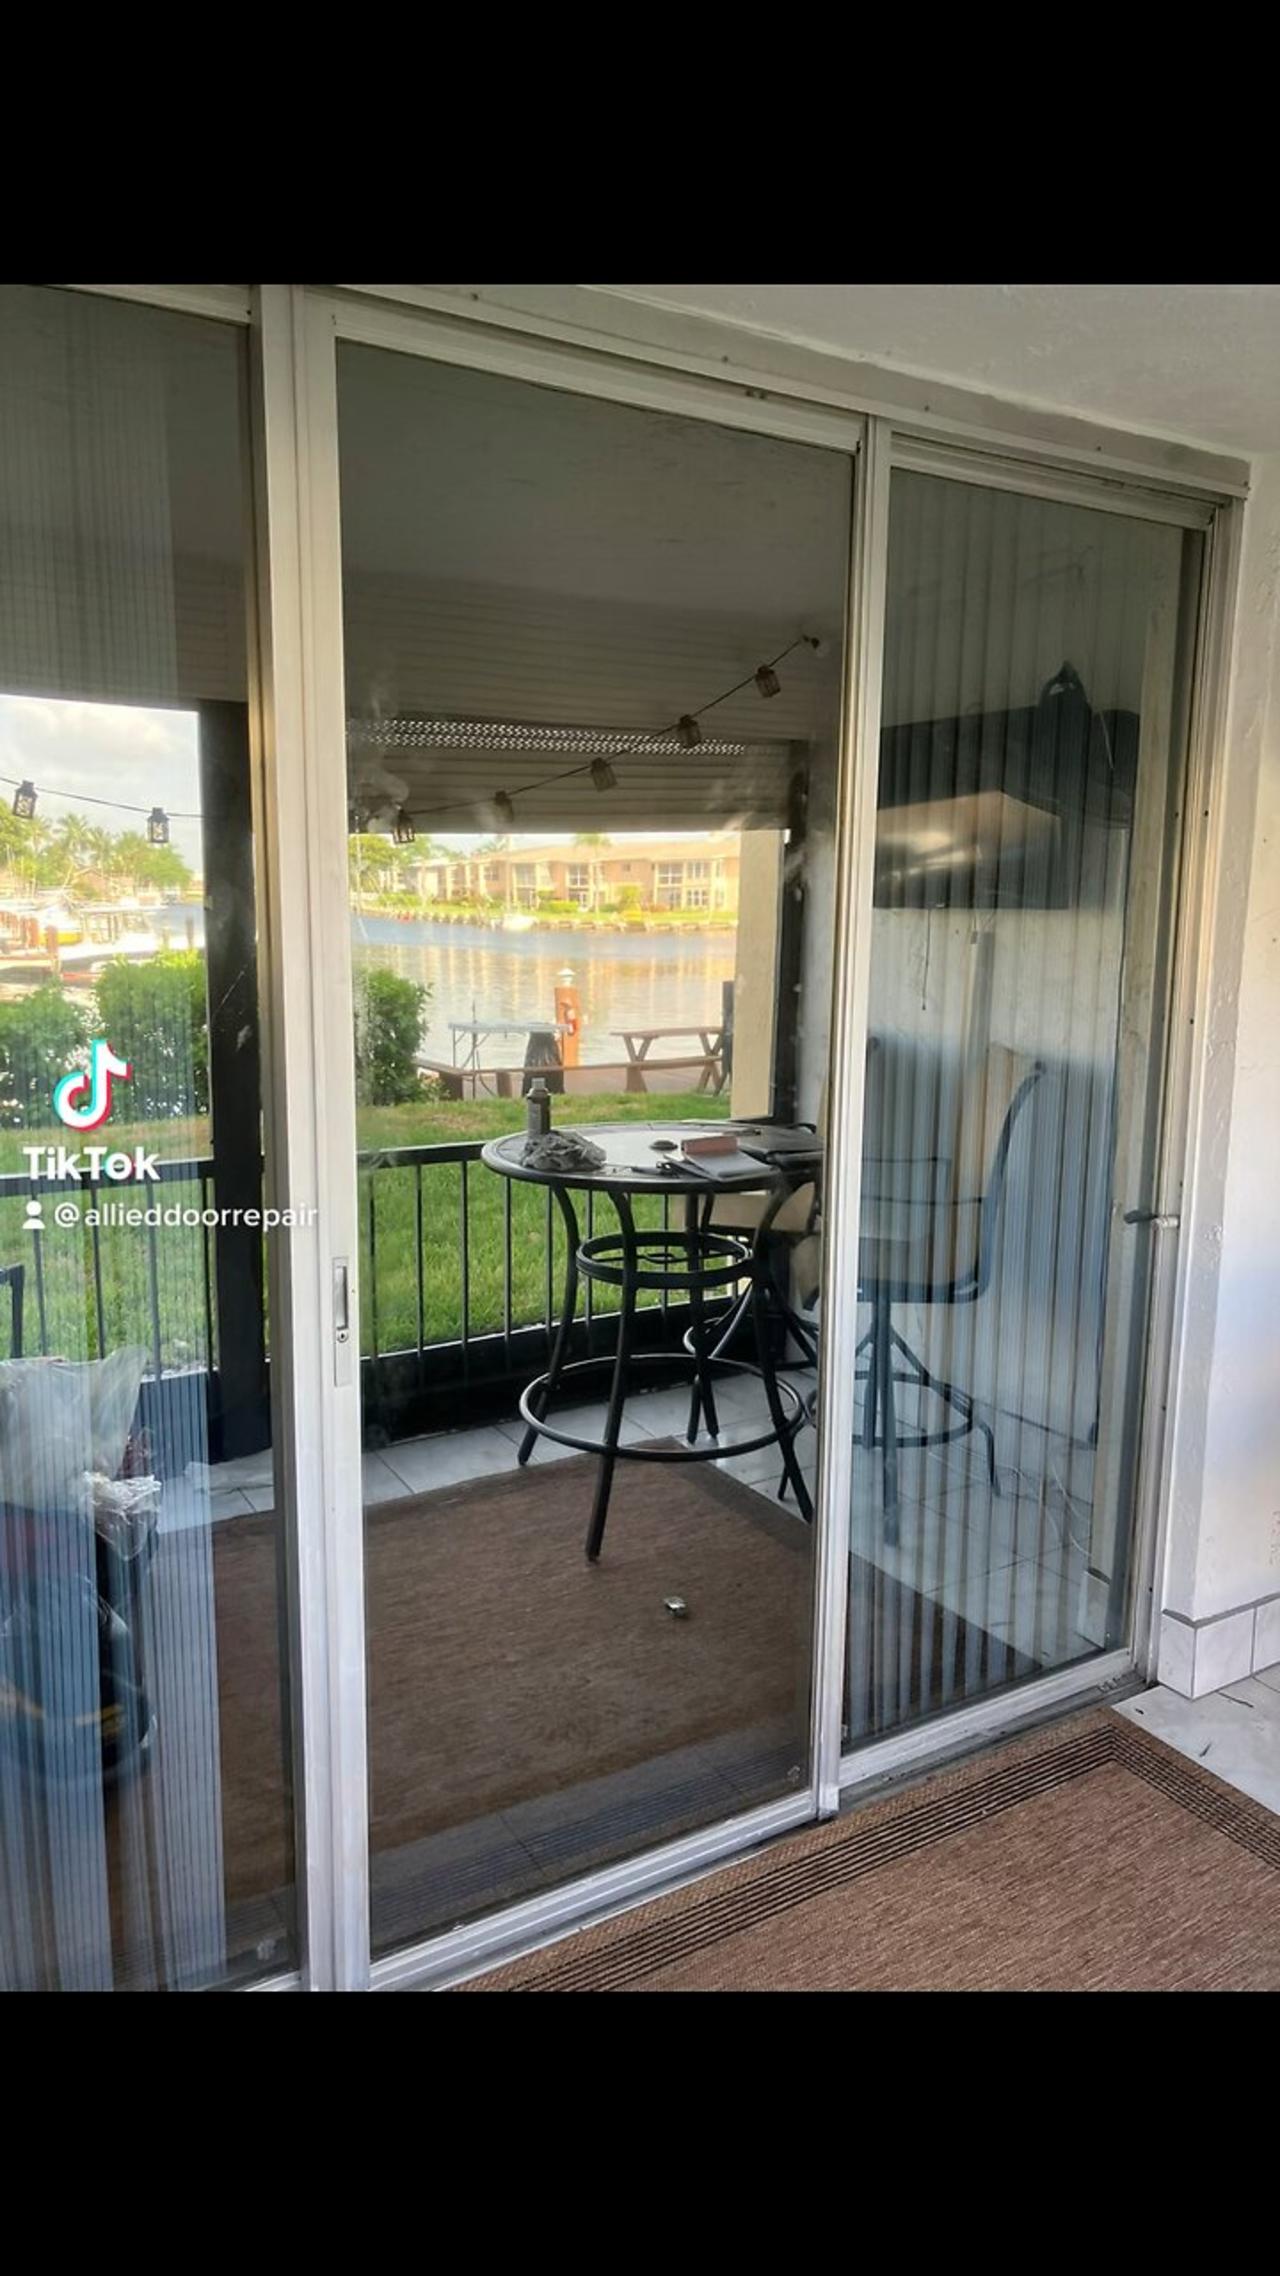 Sliding glass door repair; roller and track replacement, in Pompano Beach, Fl.